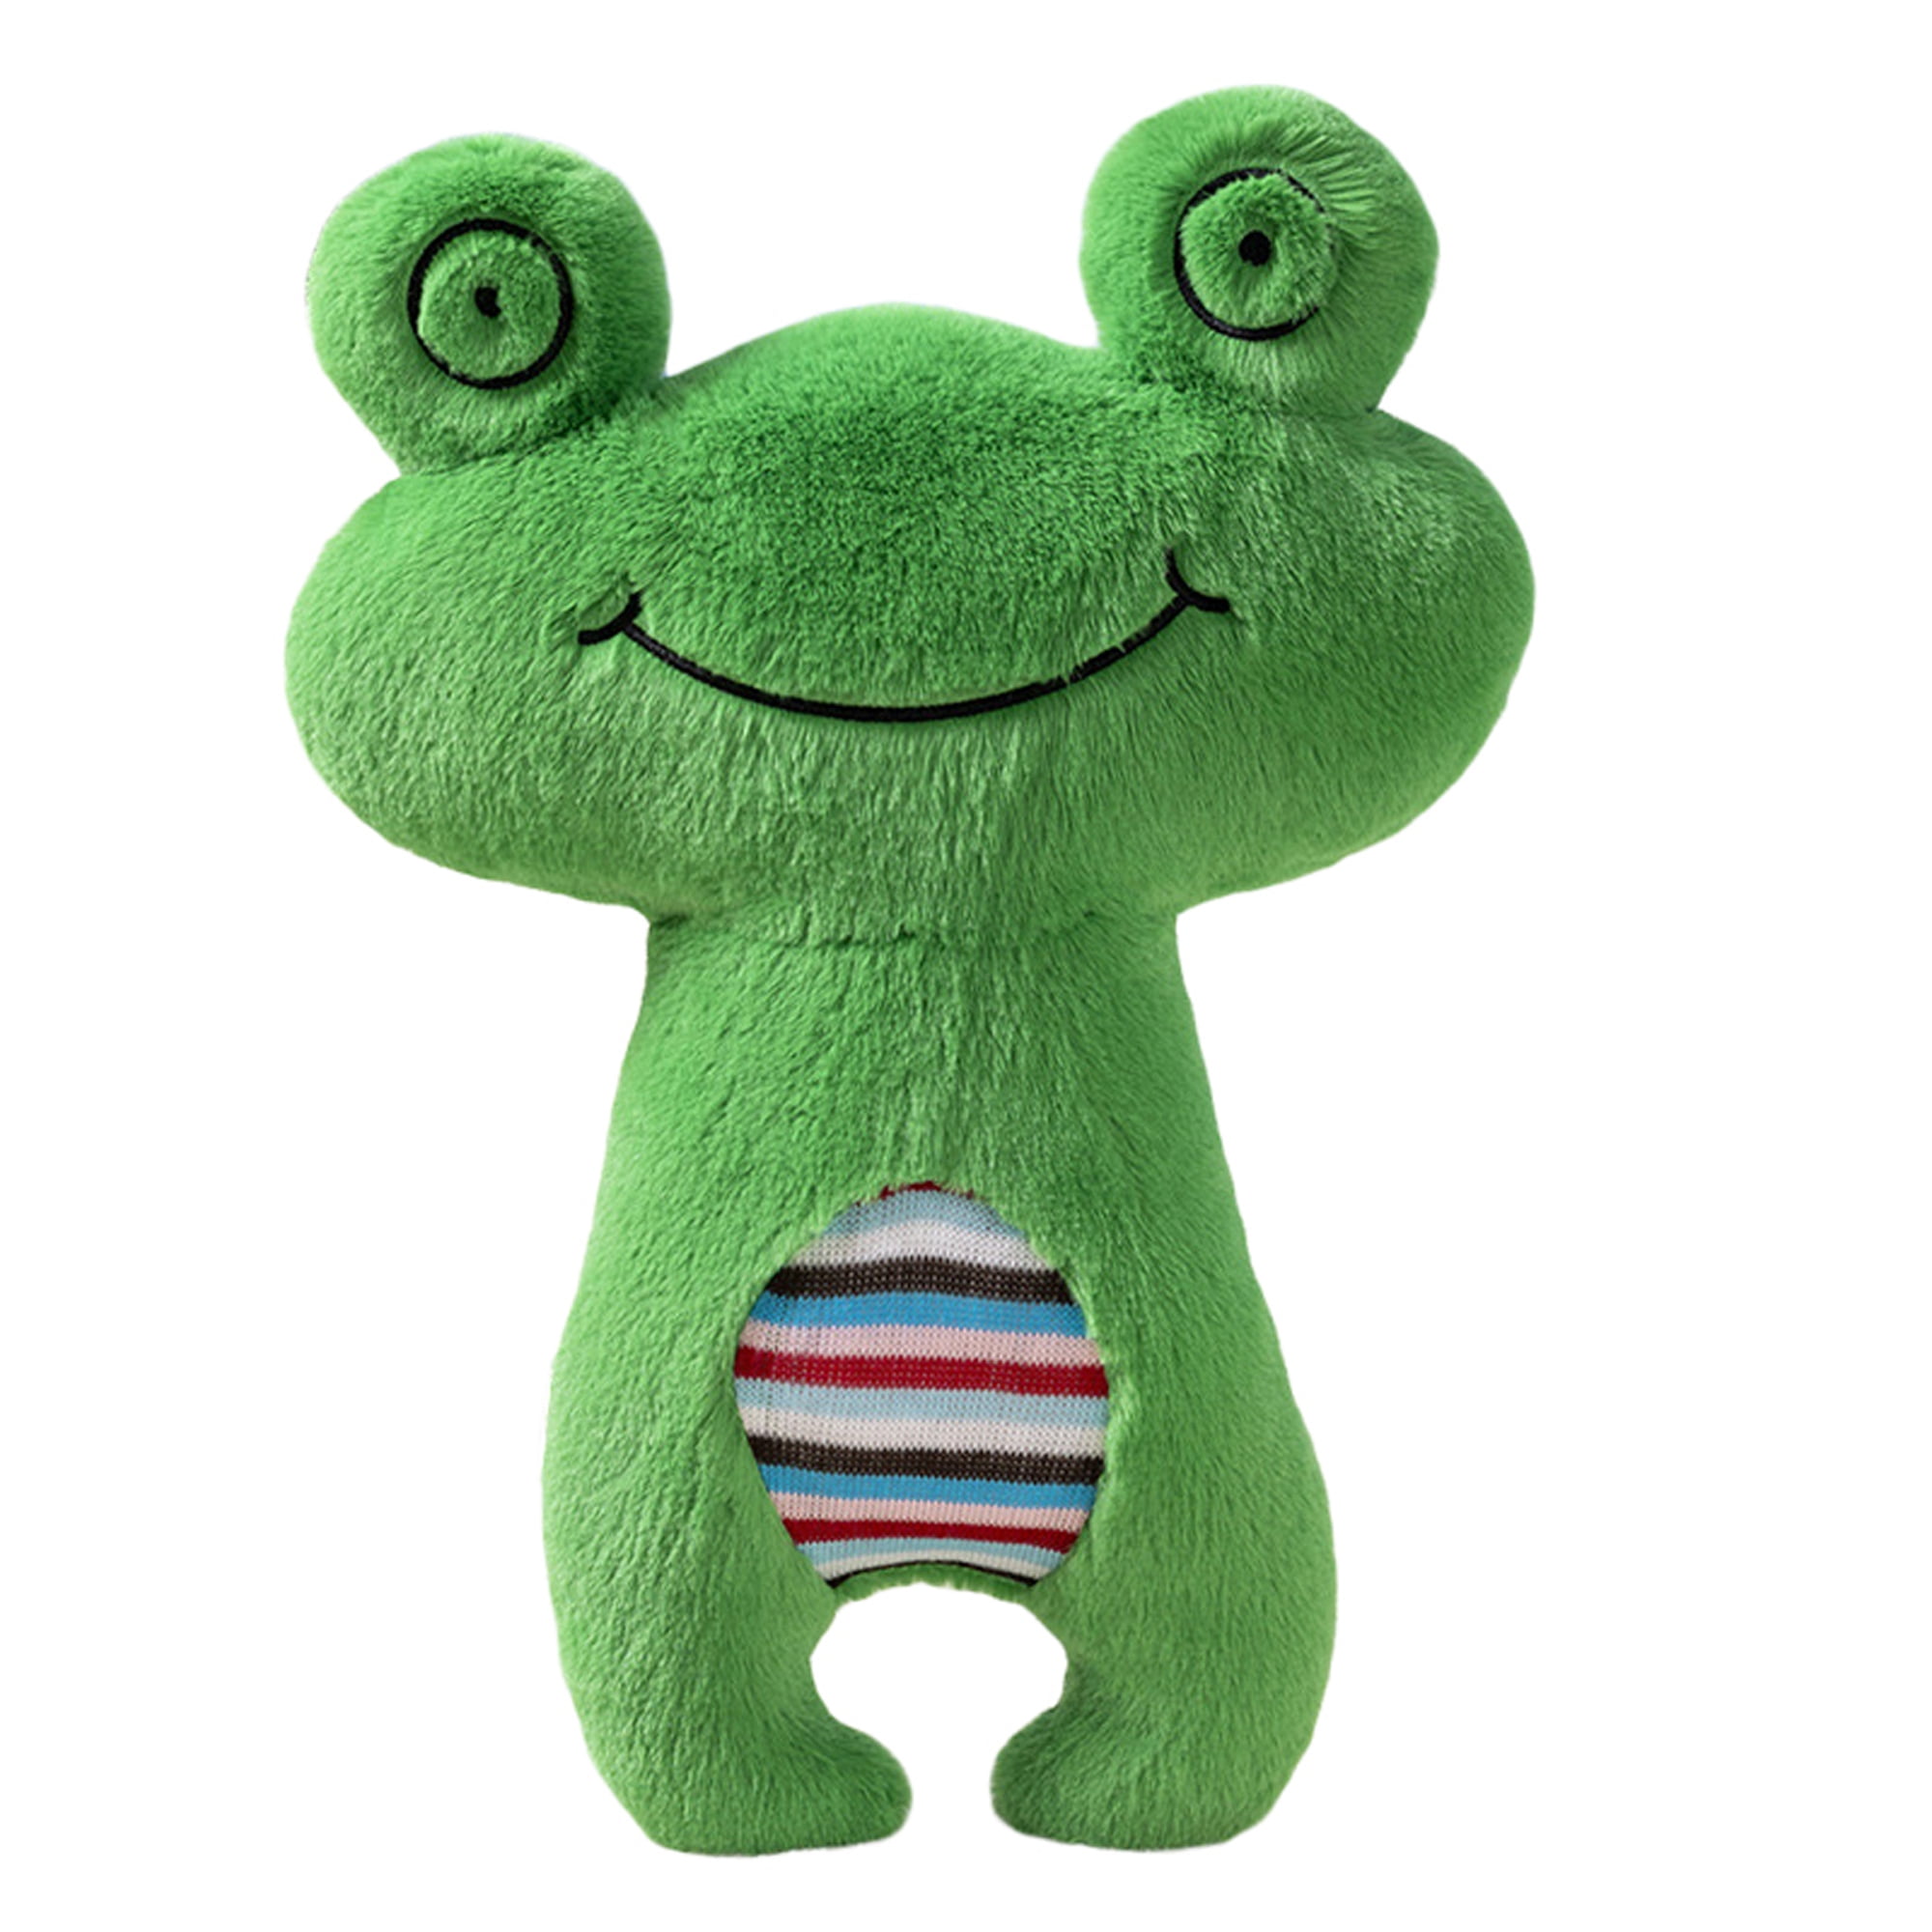 Frog Stuffed Animal - 18 Inch Stuffed Plush Toys Huggable Plush Frog Toy,  Green Frog Plush with Smiling Face Giant Gift for Kids